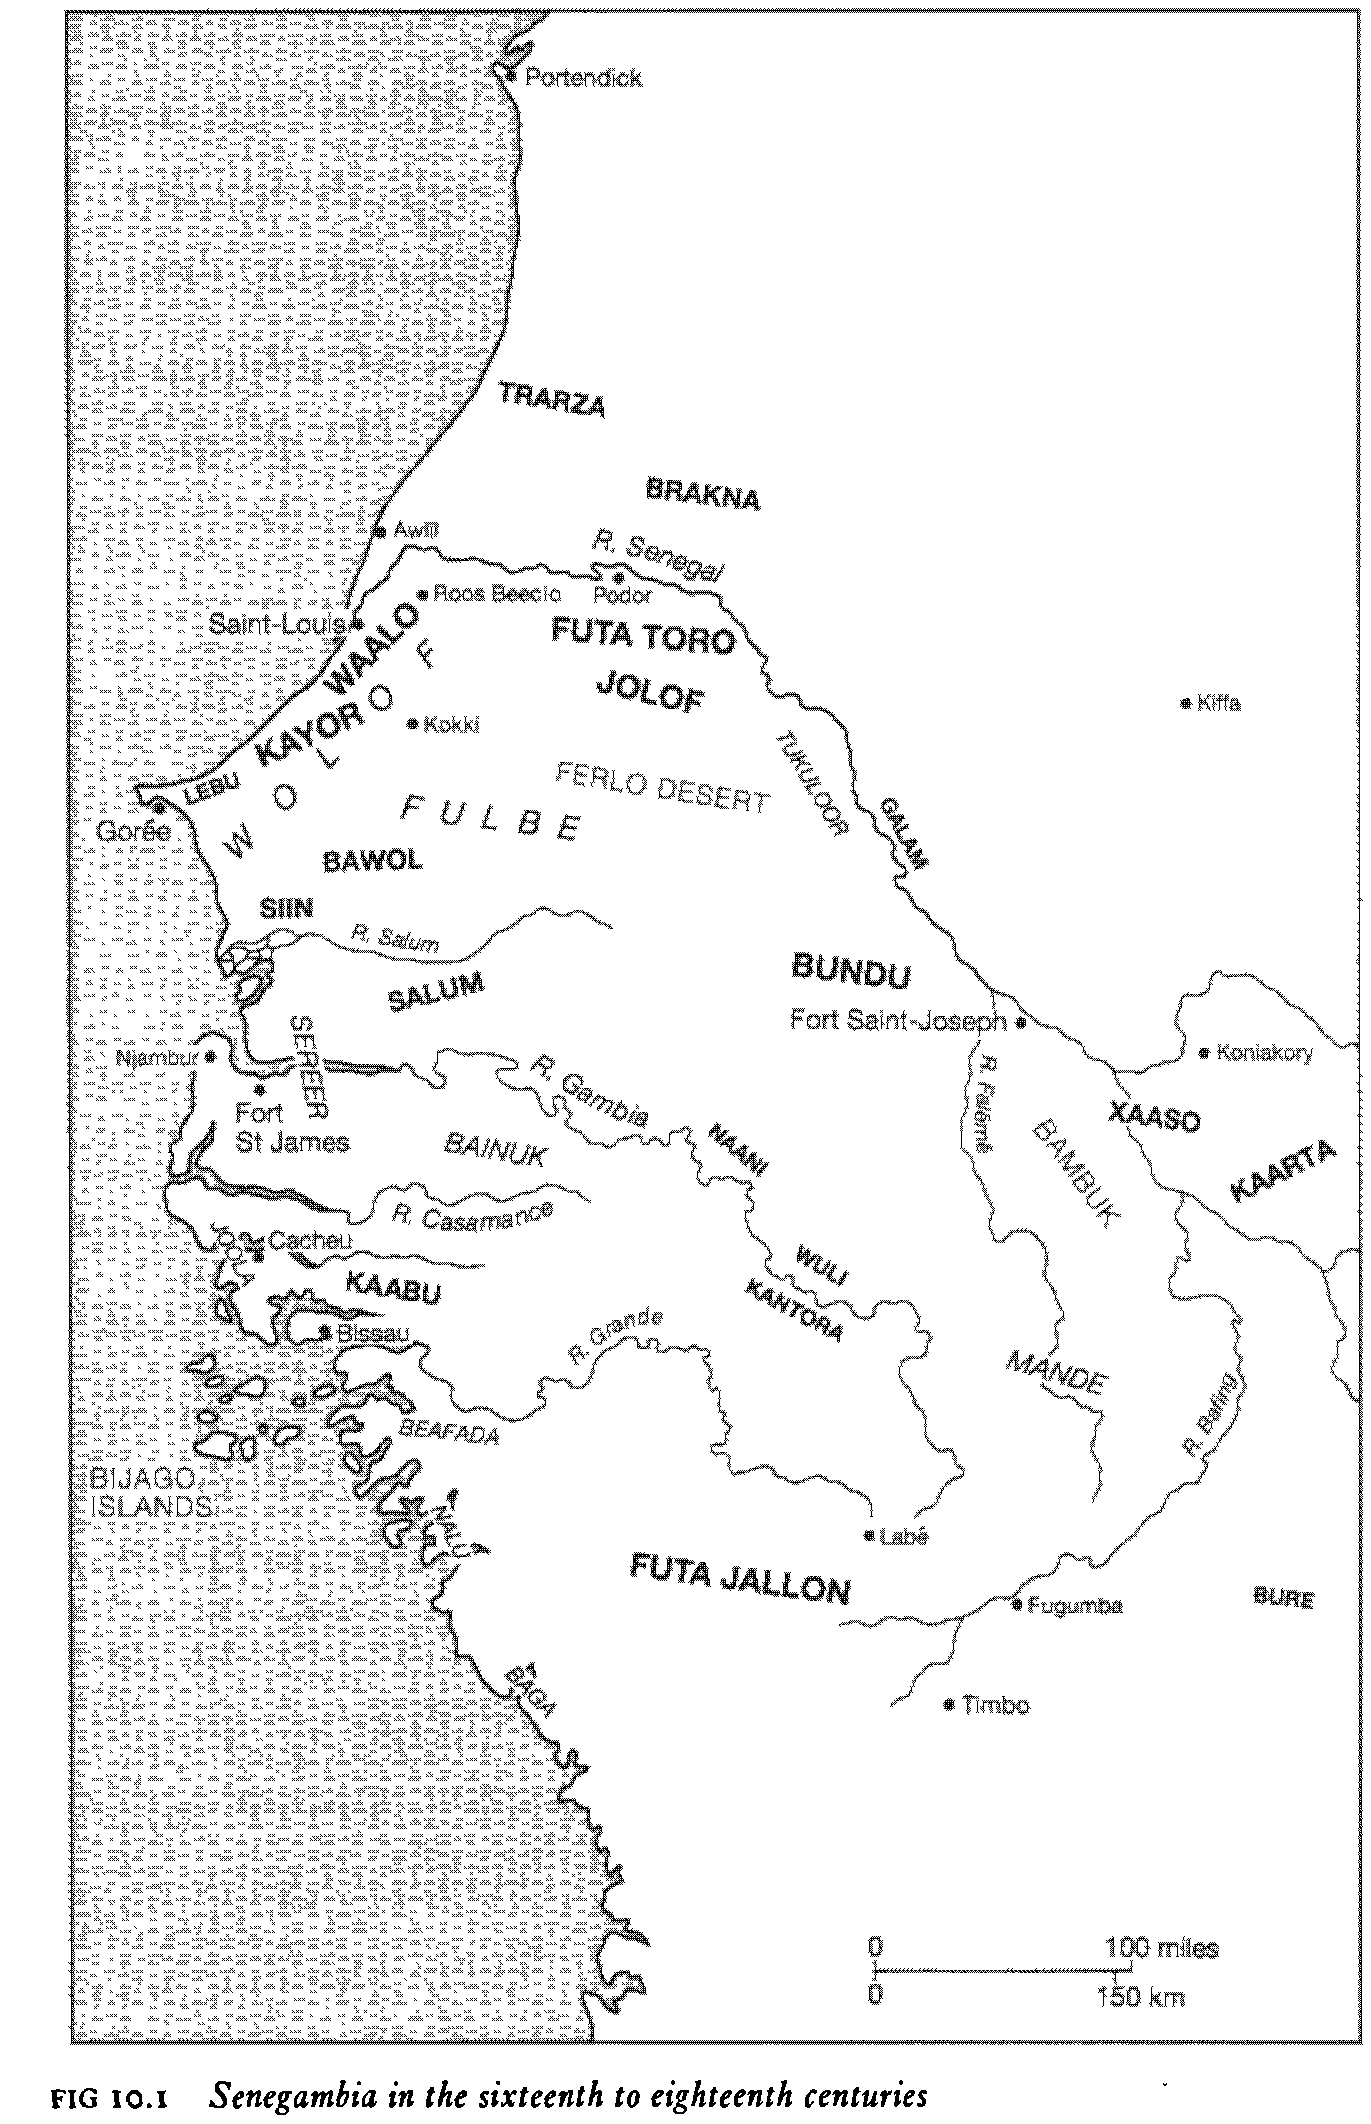 Senegambia in the sixteenth to eighteenth centuries.png